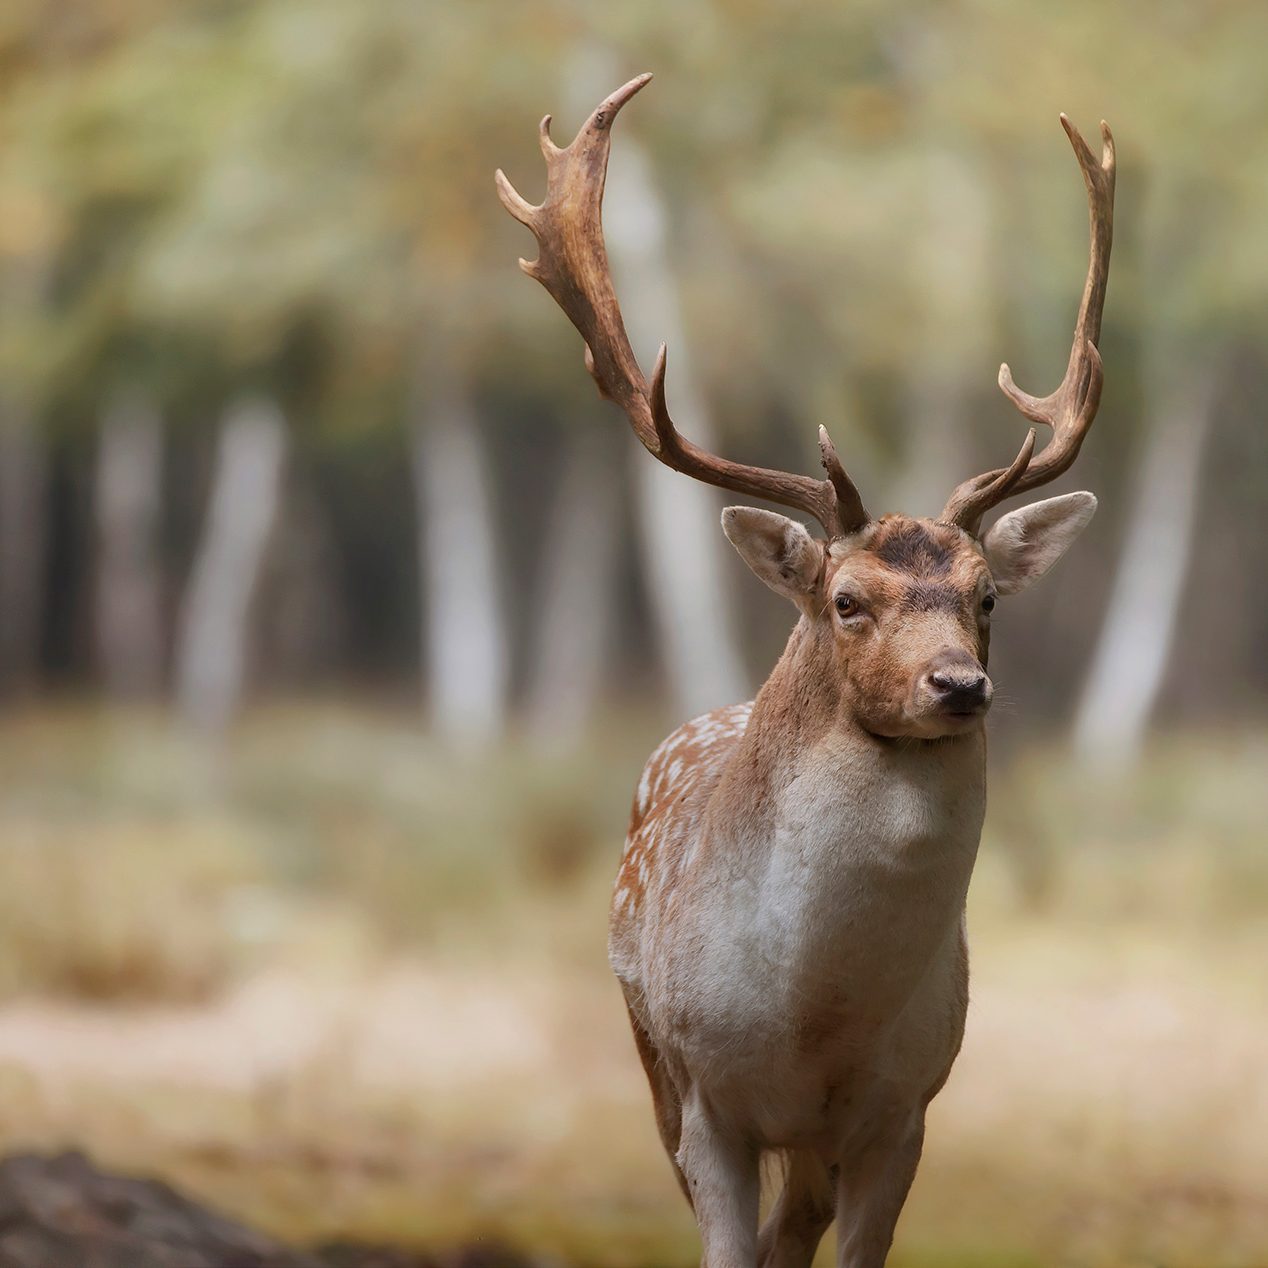 Daim Fallow deer animal animaux divers foret forest europe france nikon d810 photographie photography nature wild sauvage close-up